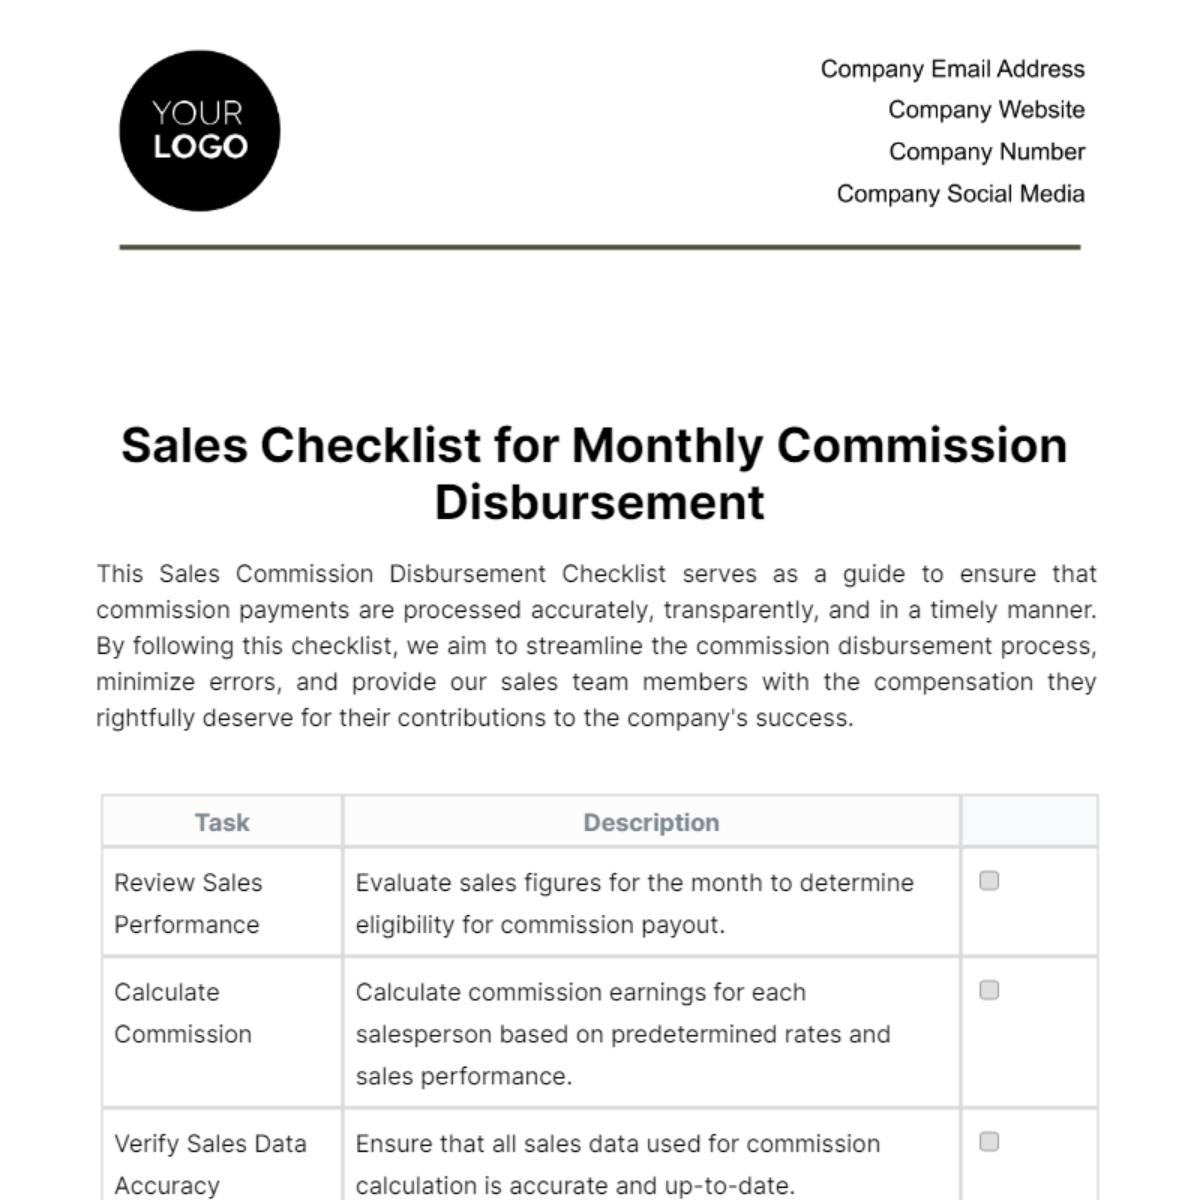 Free Sales Checklist for Monthly Commission Disbursement Template